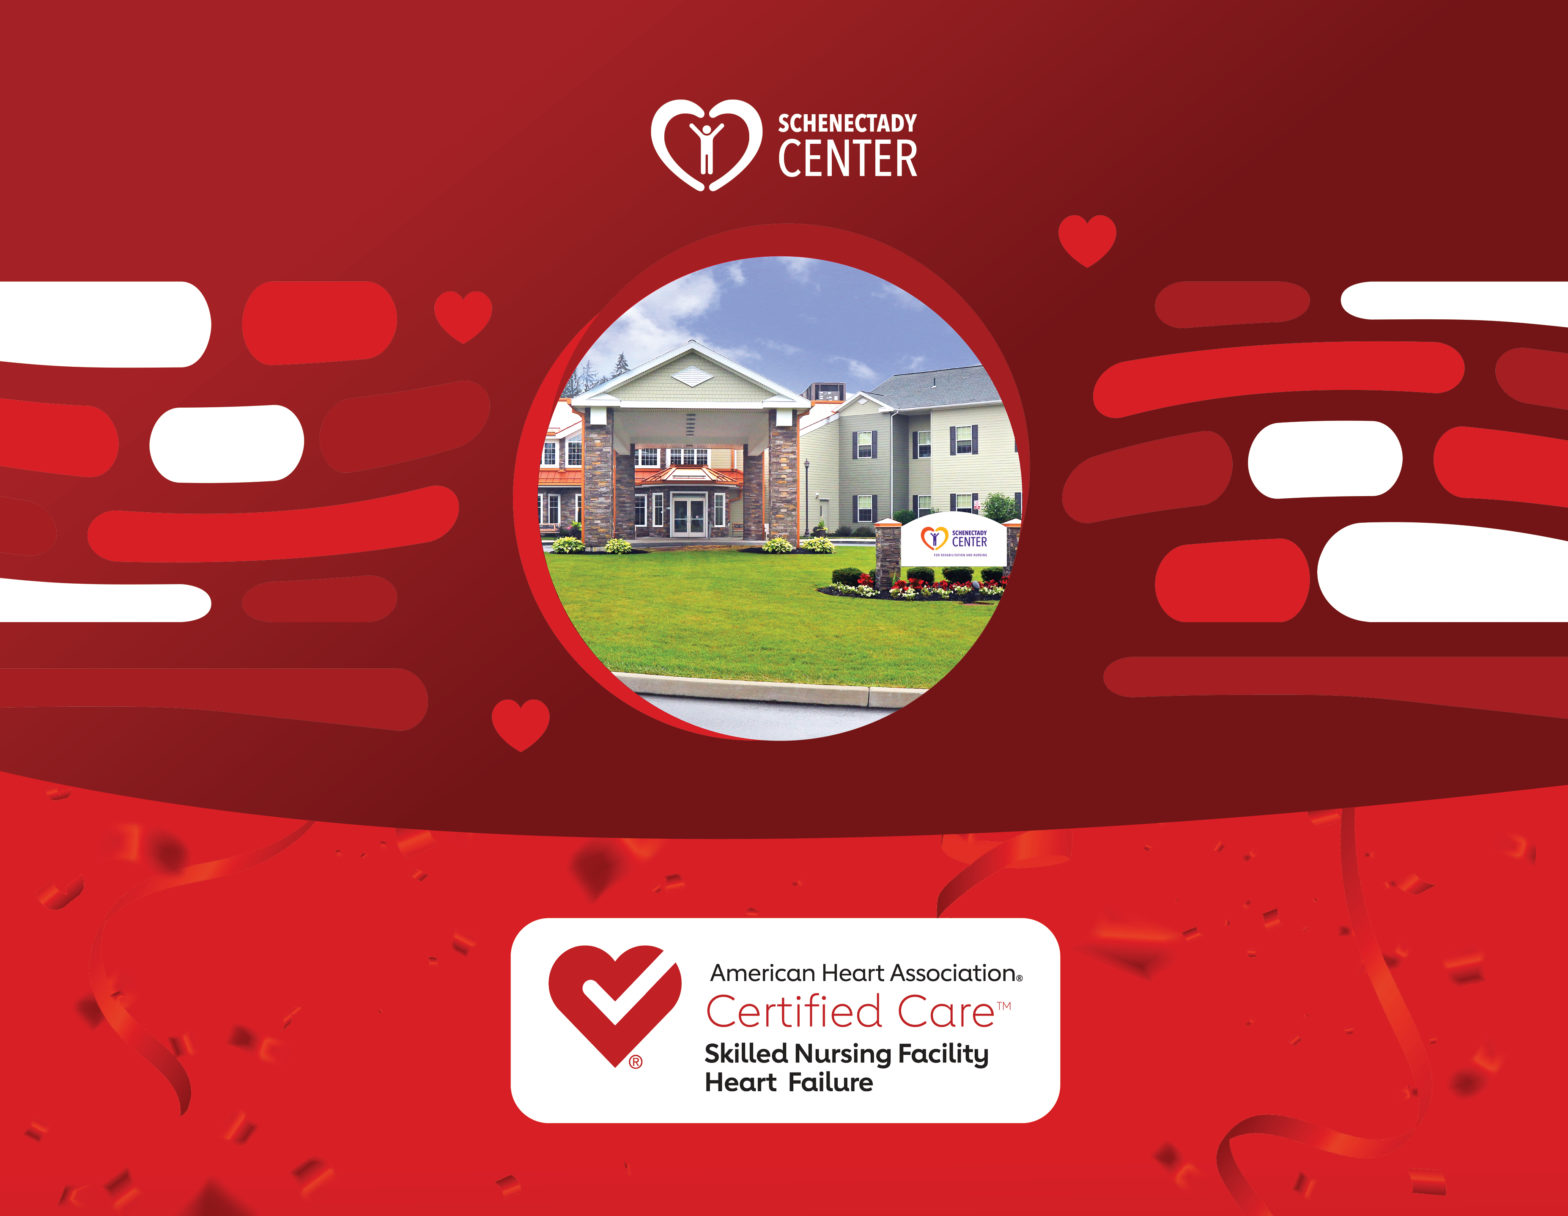 Schenectady Center receives Skilled Nursing Facility Heart Failure Certification from the American Heart Association